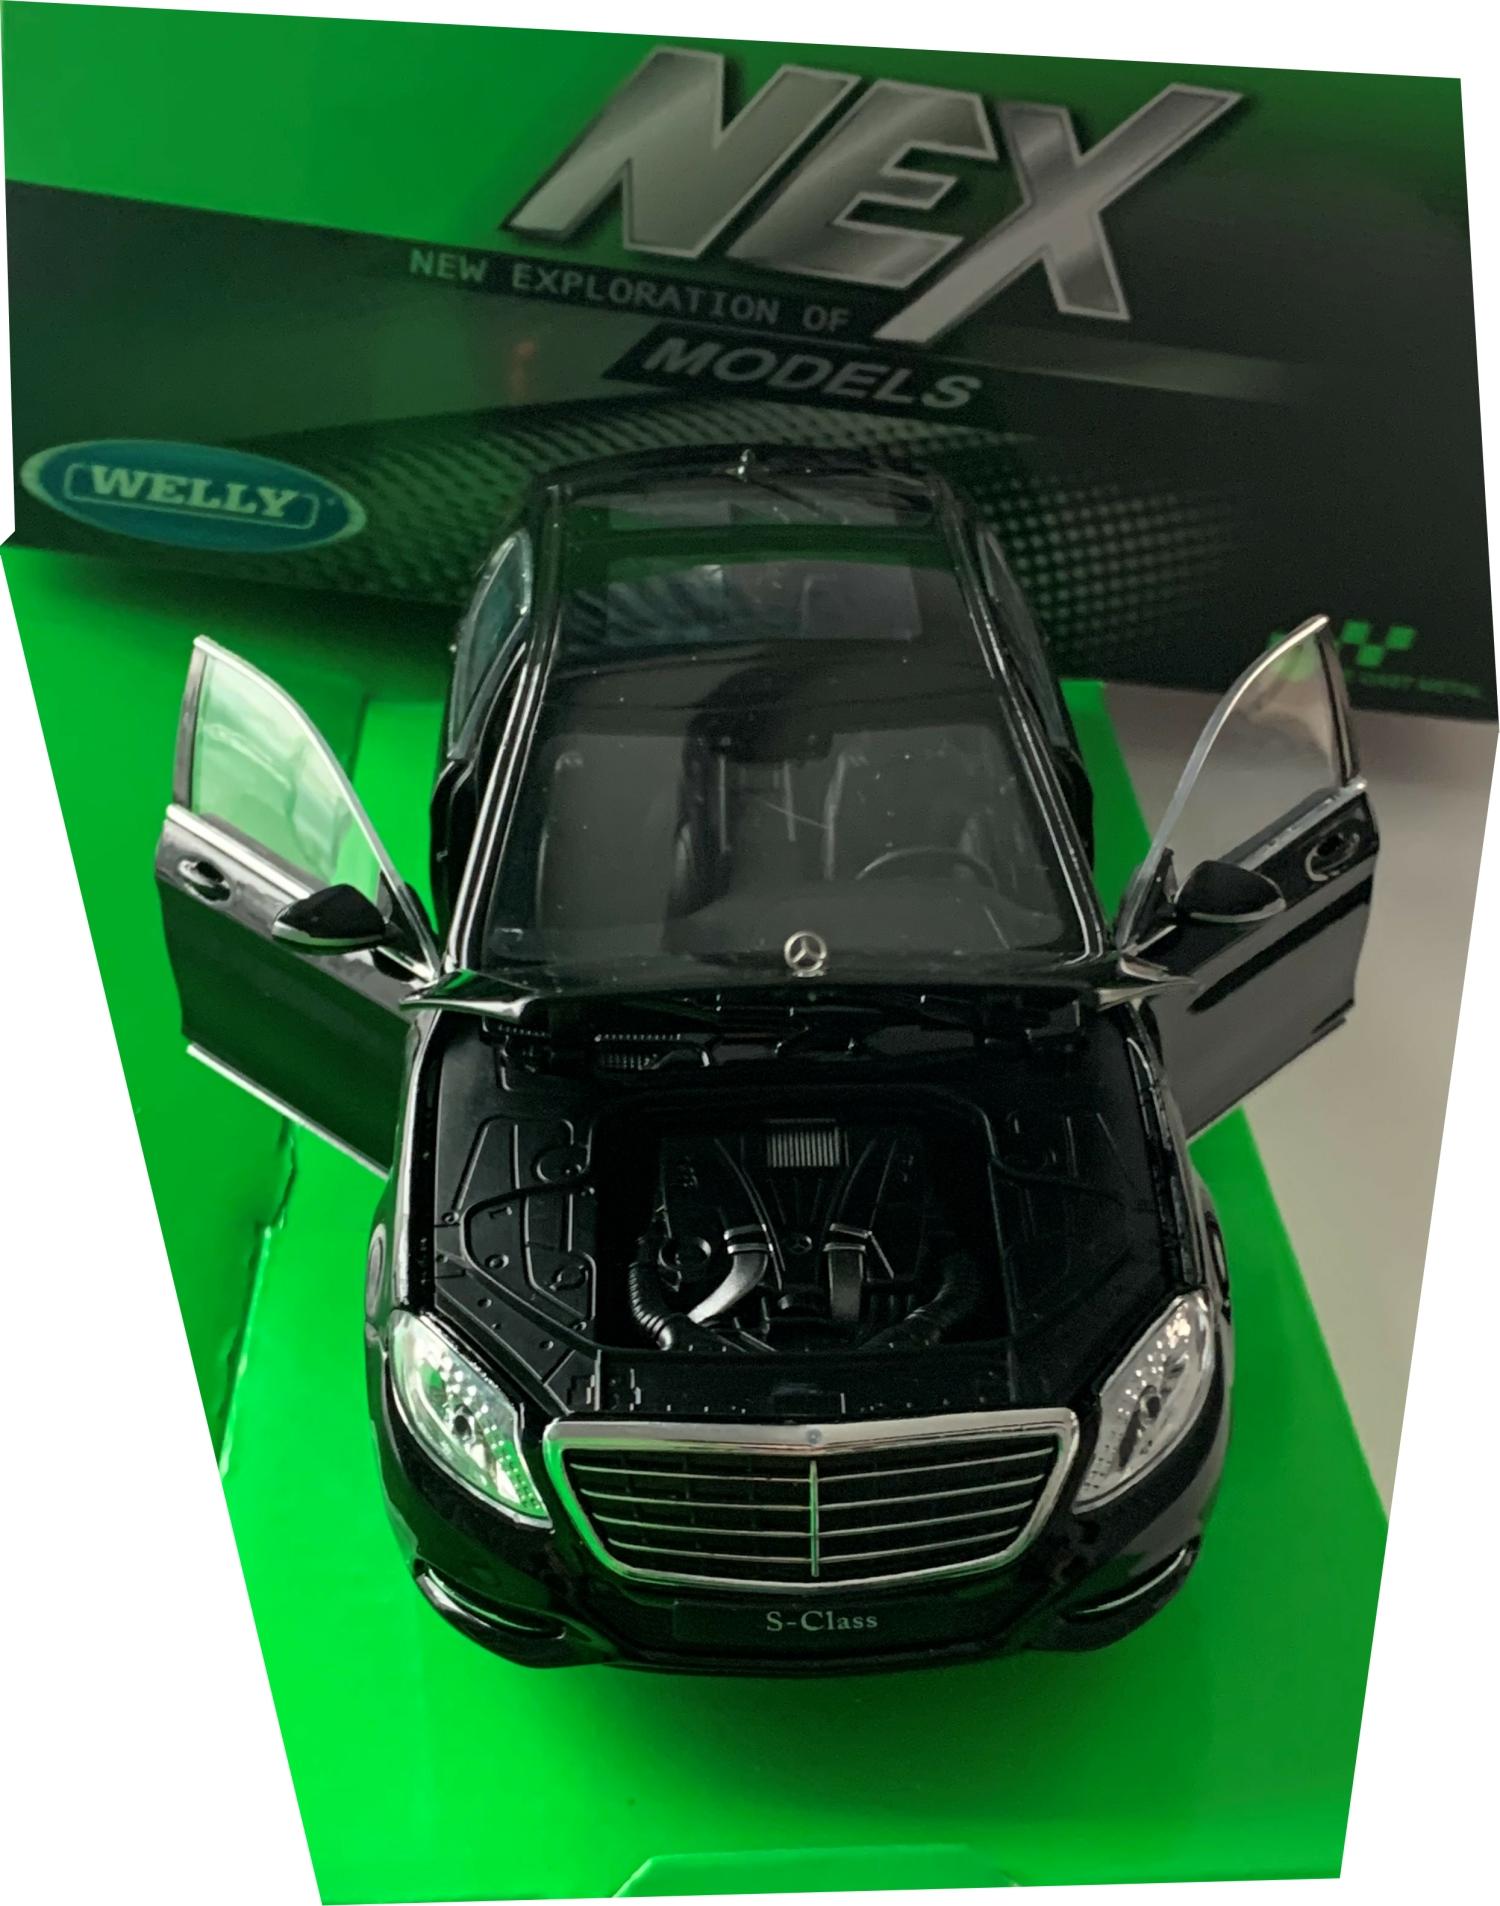 Mercedes Benz S Class 2013 in black 1:24 scale diecast model from Welly